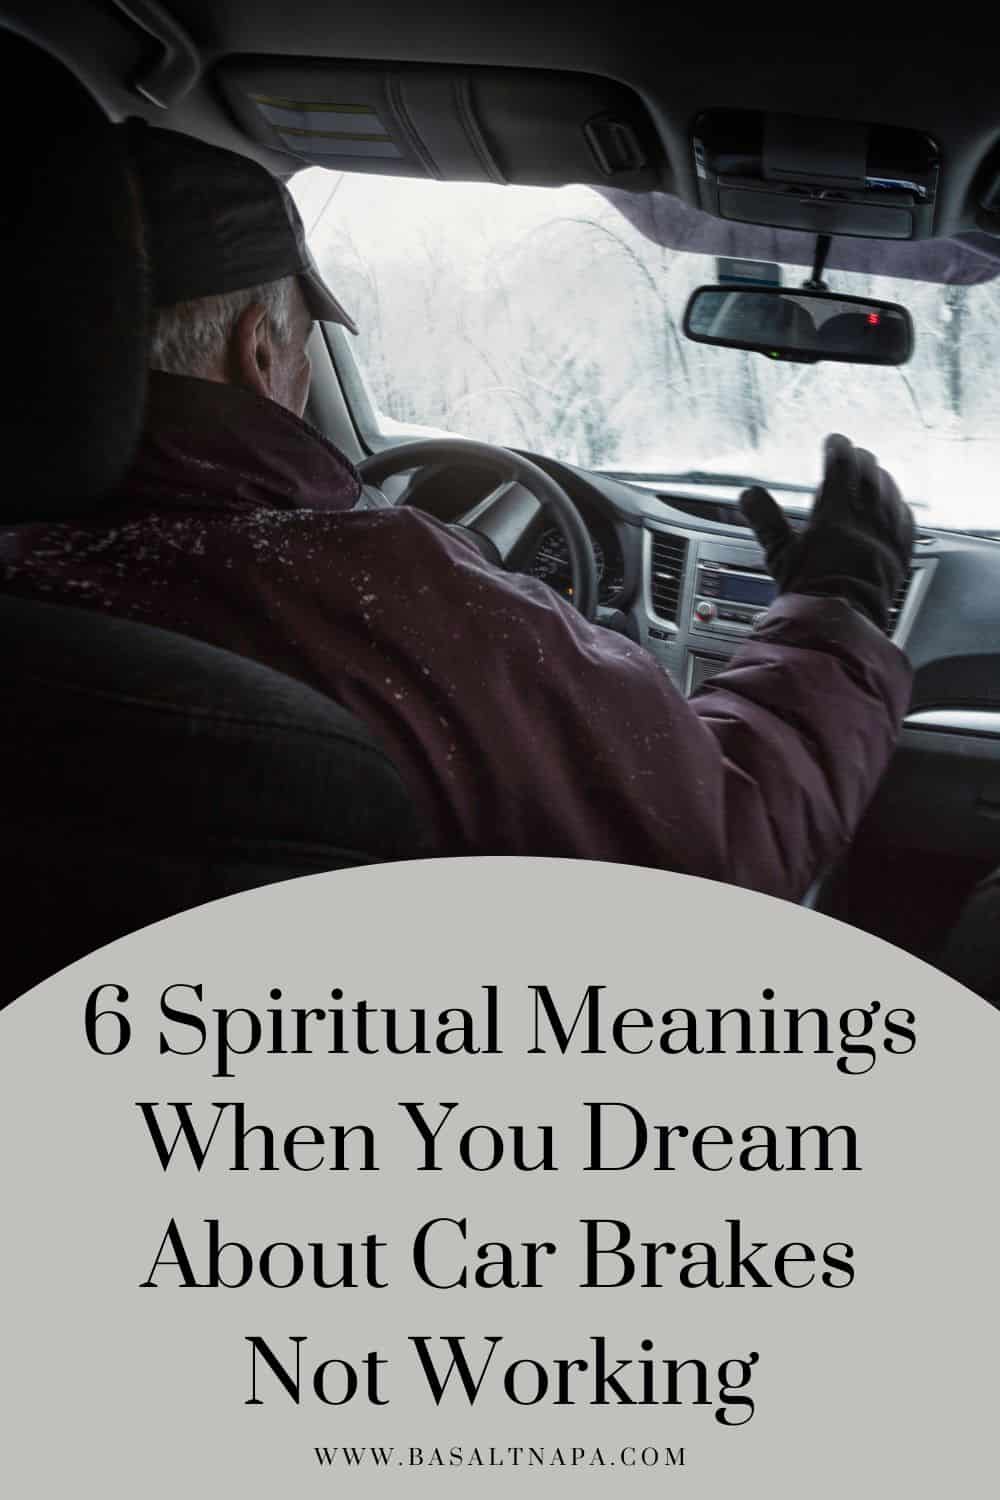 6 Spiritual Meanings When You Dream About Car Brakes Not Working